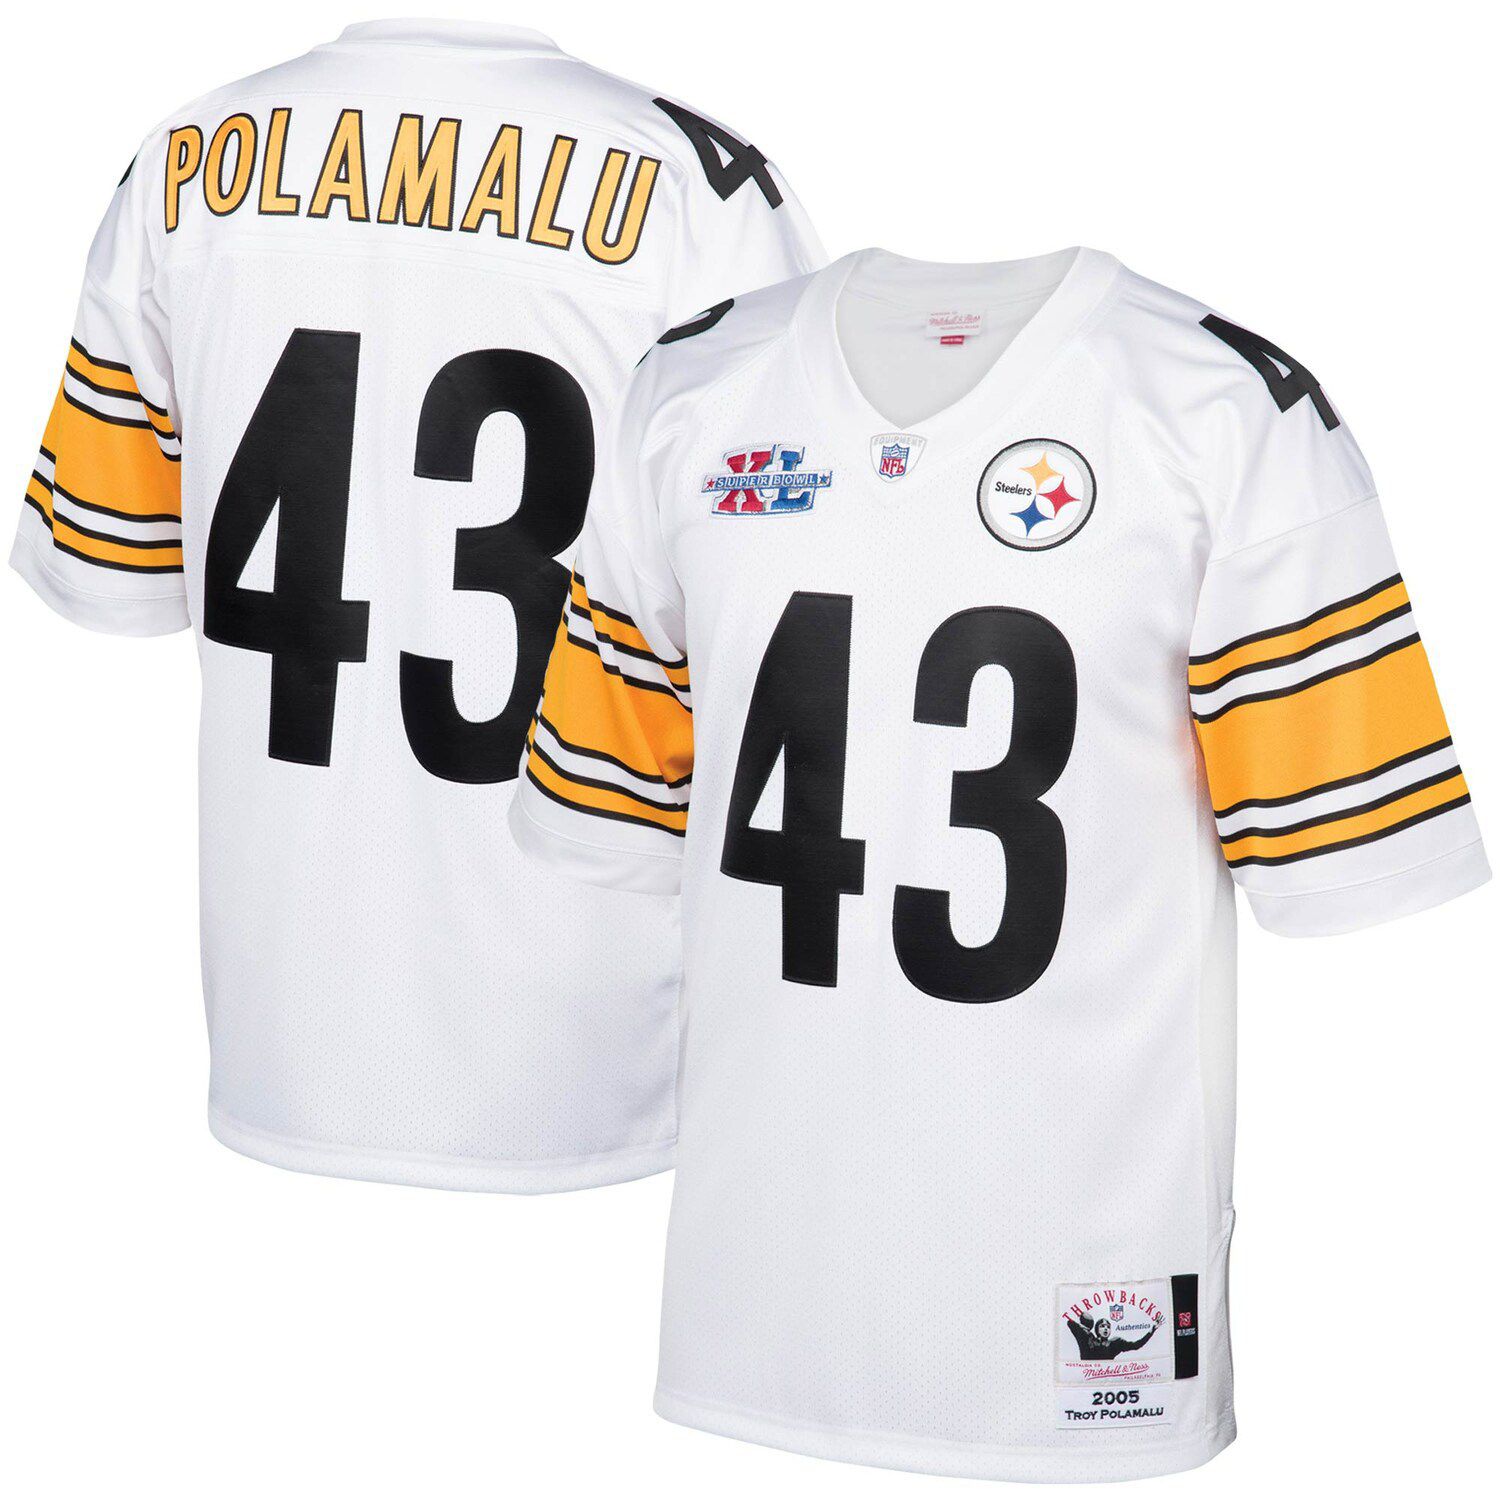 Steelers Throwback Jersey